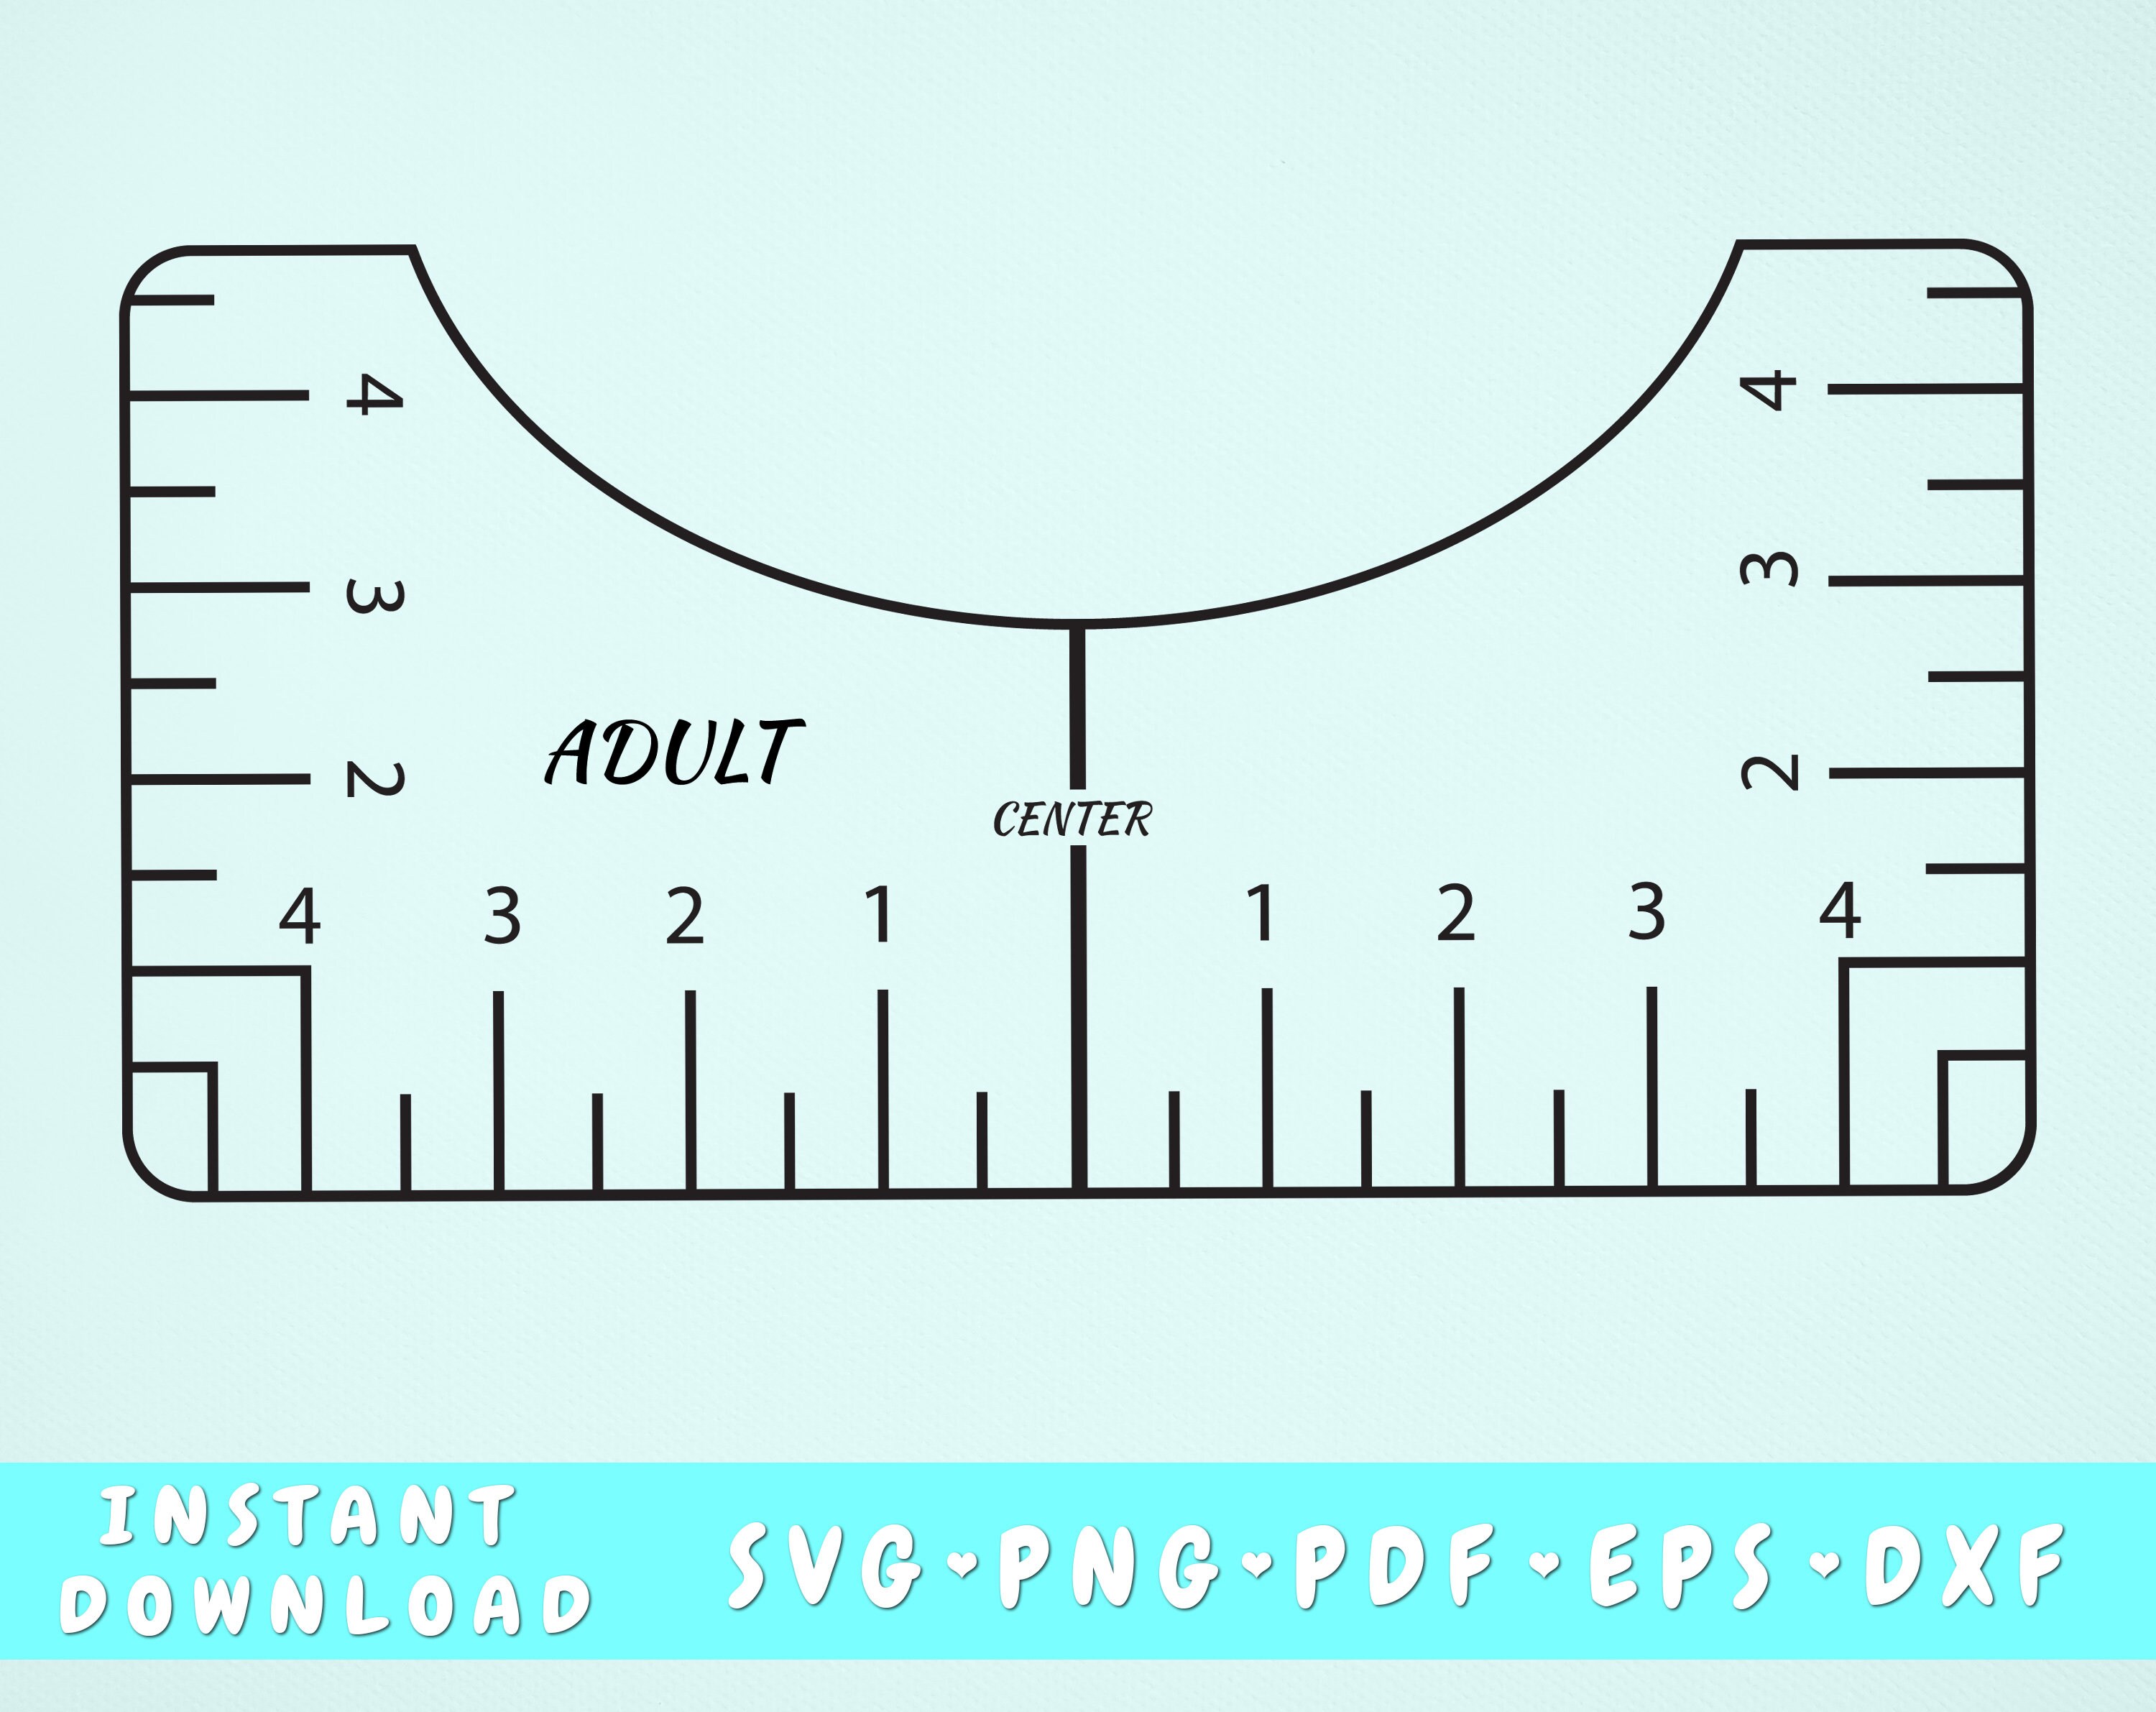 Tshirt Ruler SVG Bundle, T-shirt Alignment Tool DXF, Shirt Placement G By  Dynamic Dimensions